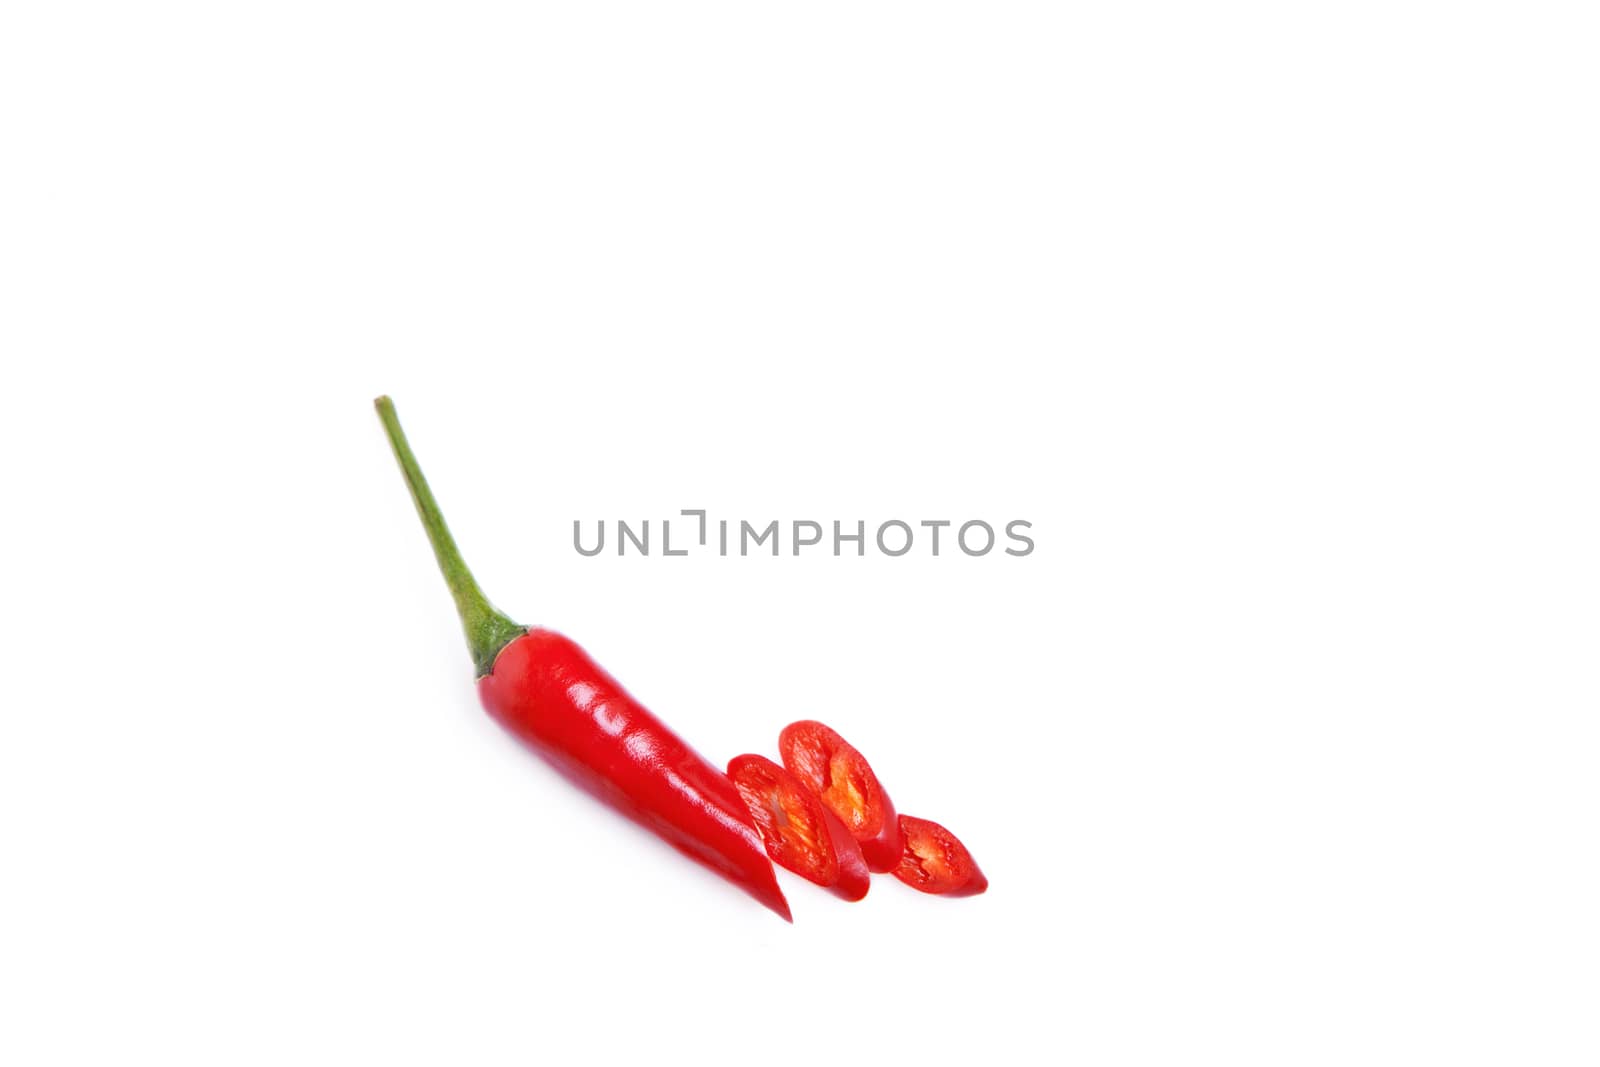  Red Chili Pepper by supercat67